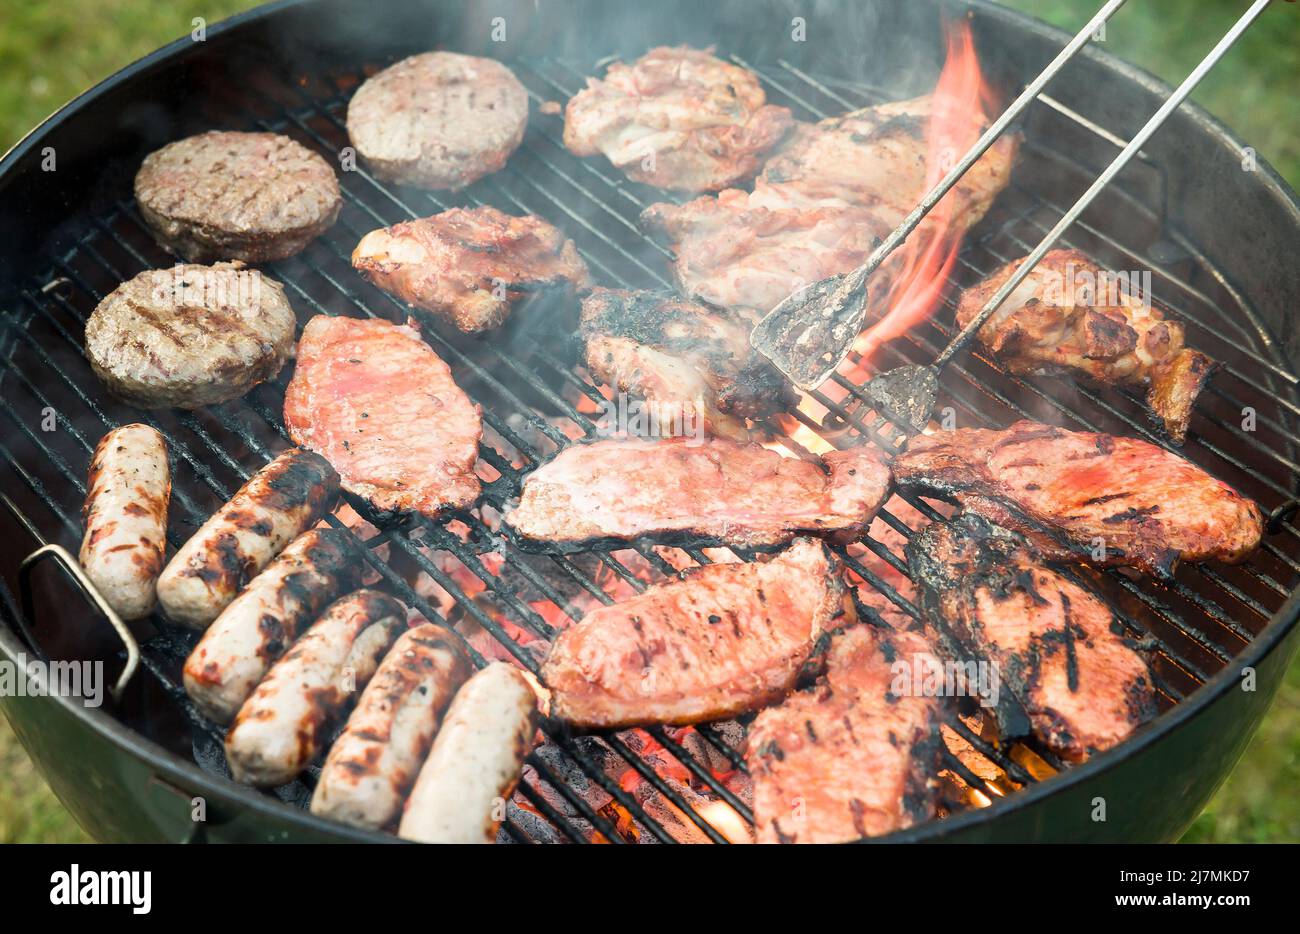 Barbecue cooking. Detail of meat cooking on a charcoal kettle home barbecue in a garden, UK Stock Photo